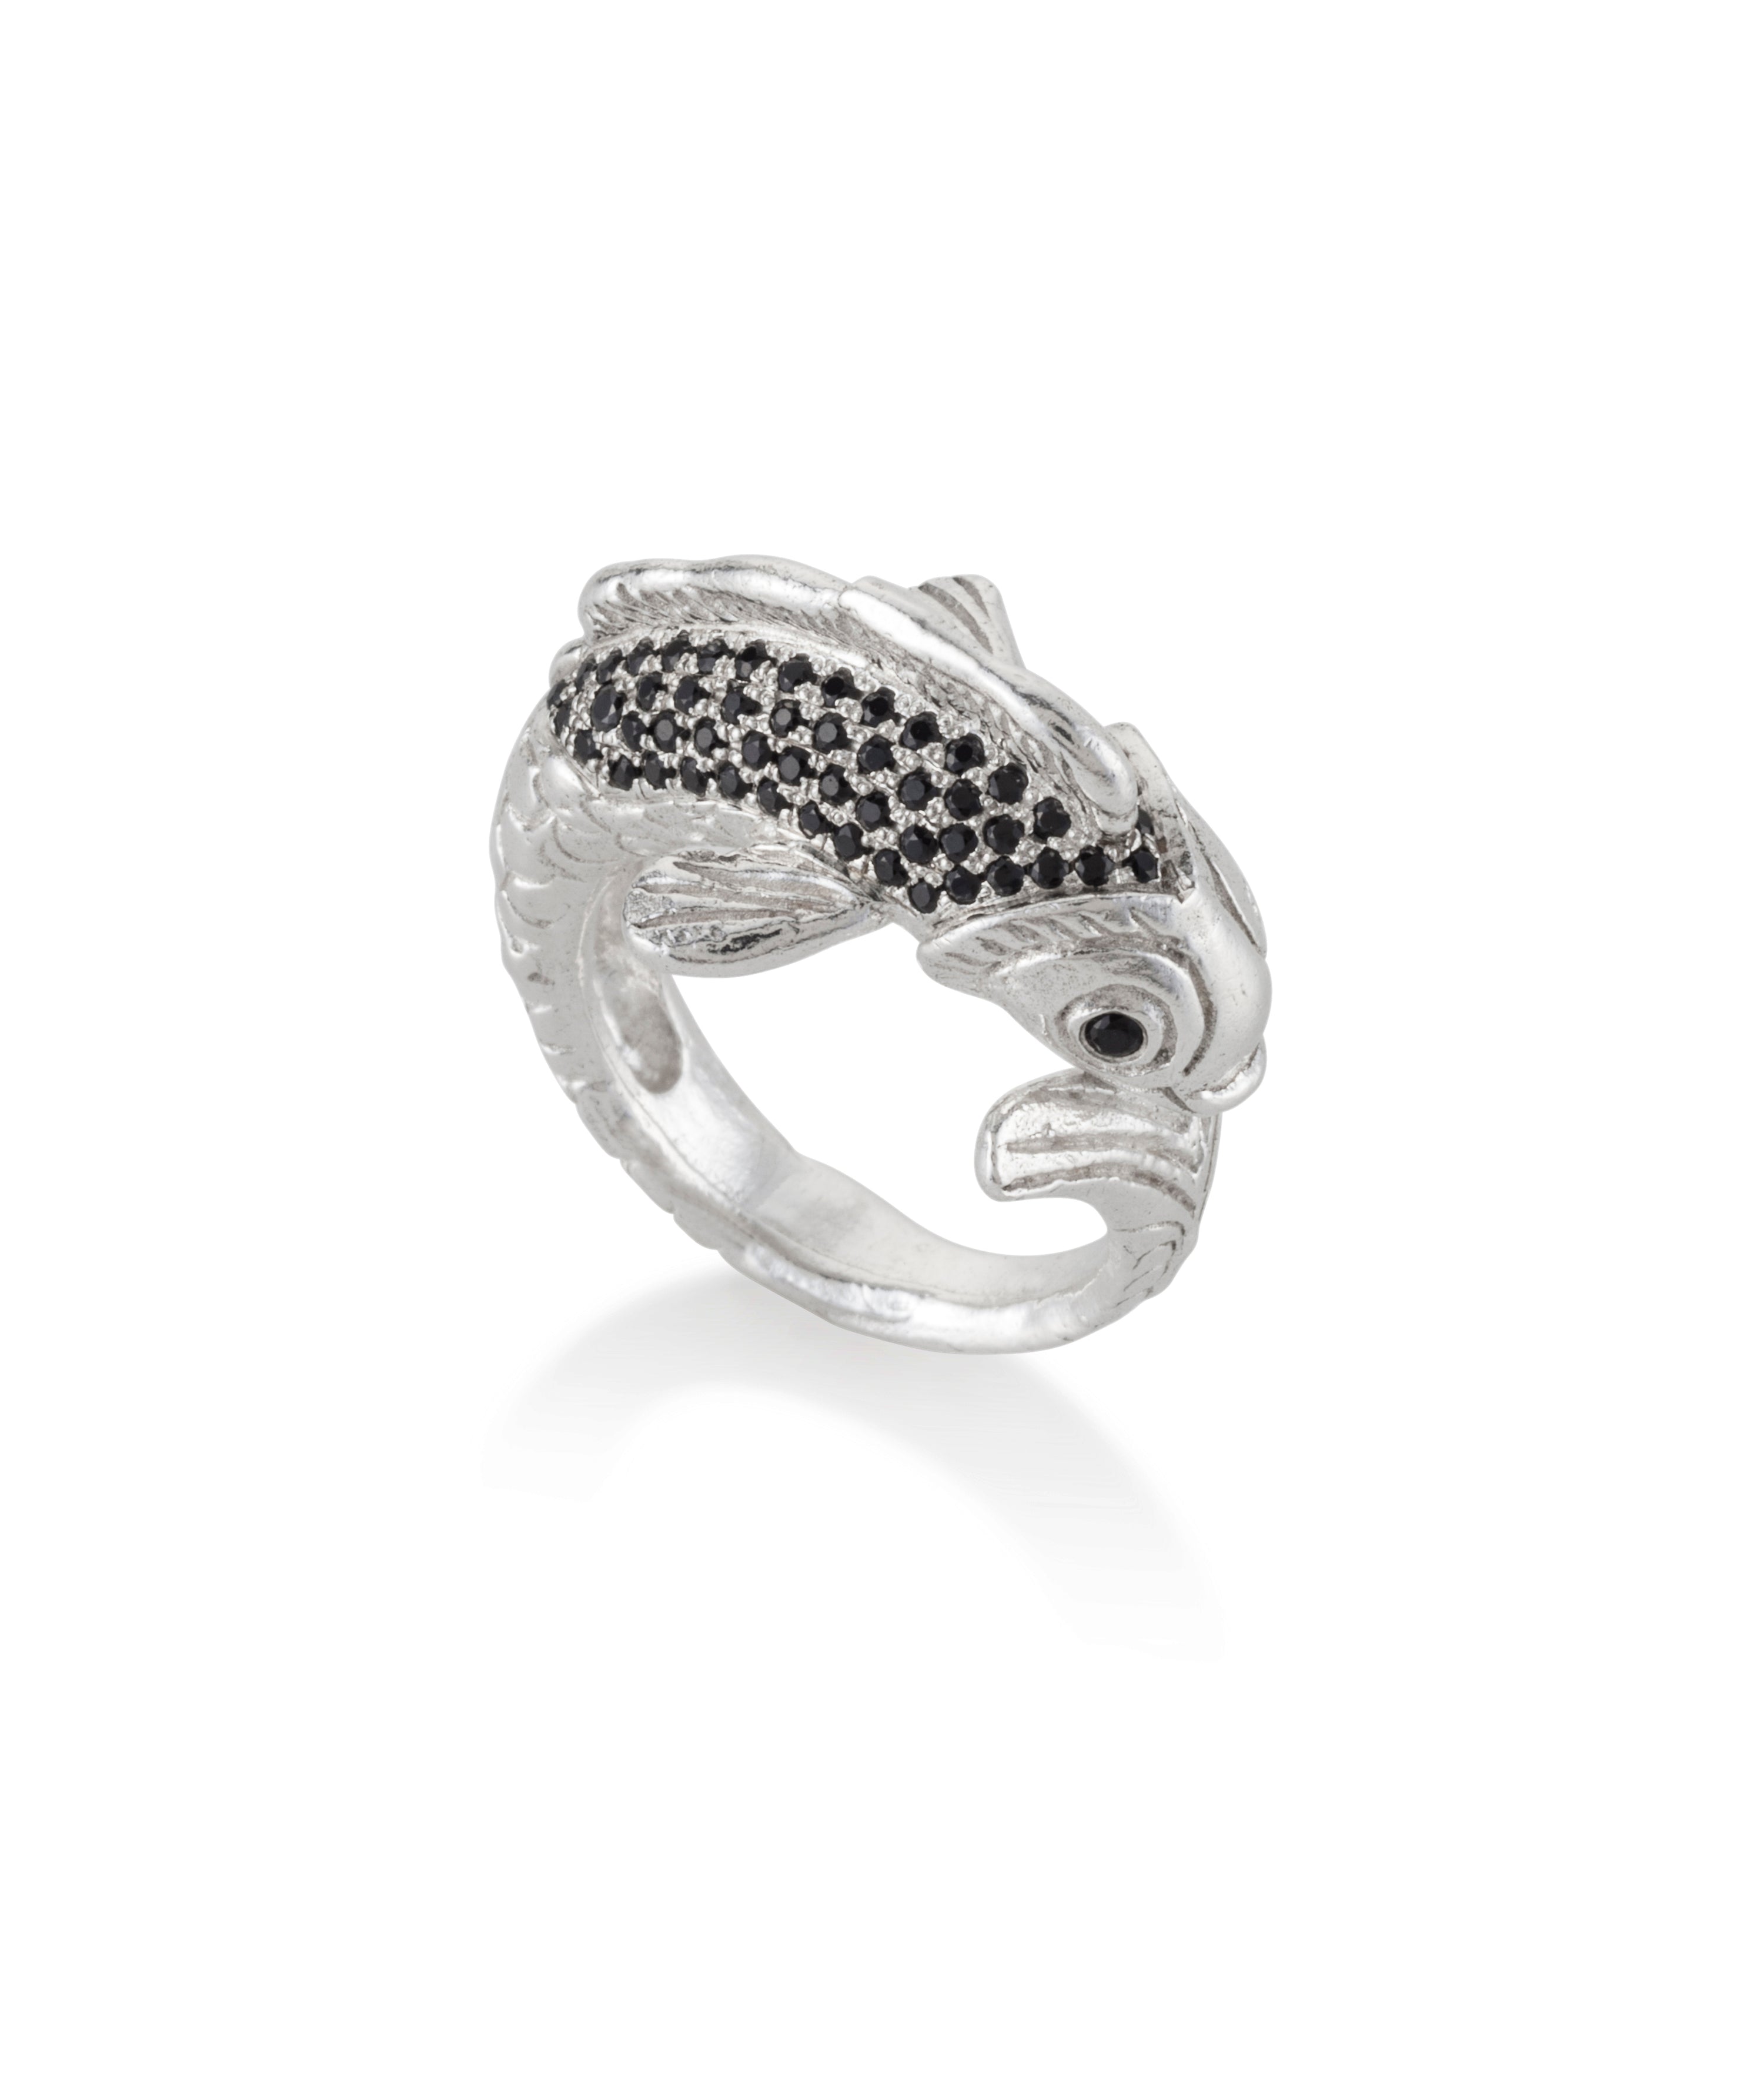 Silver Koi Fish ring with black stones